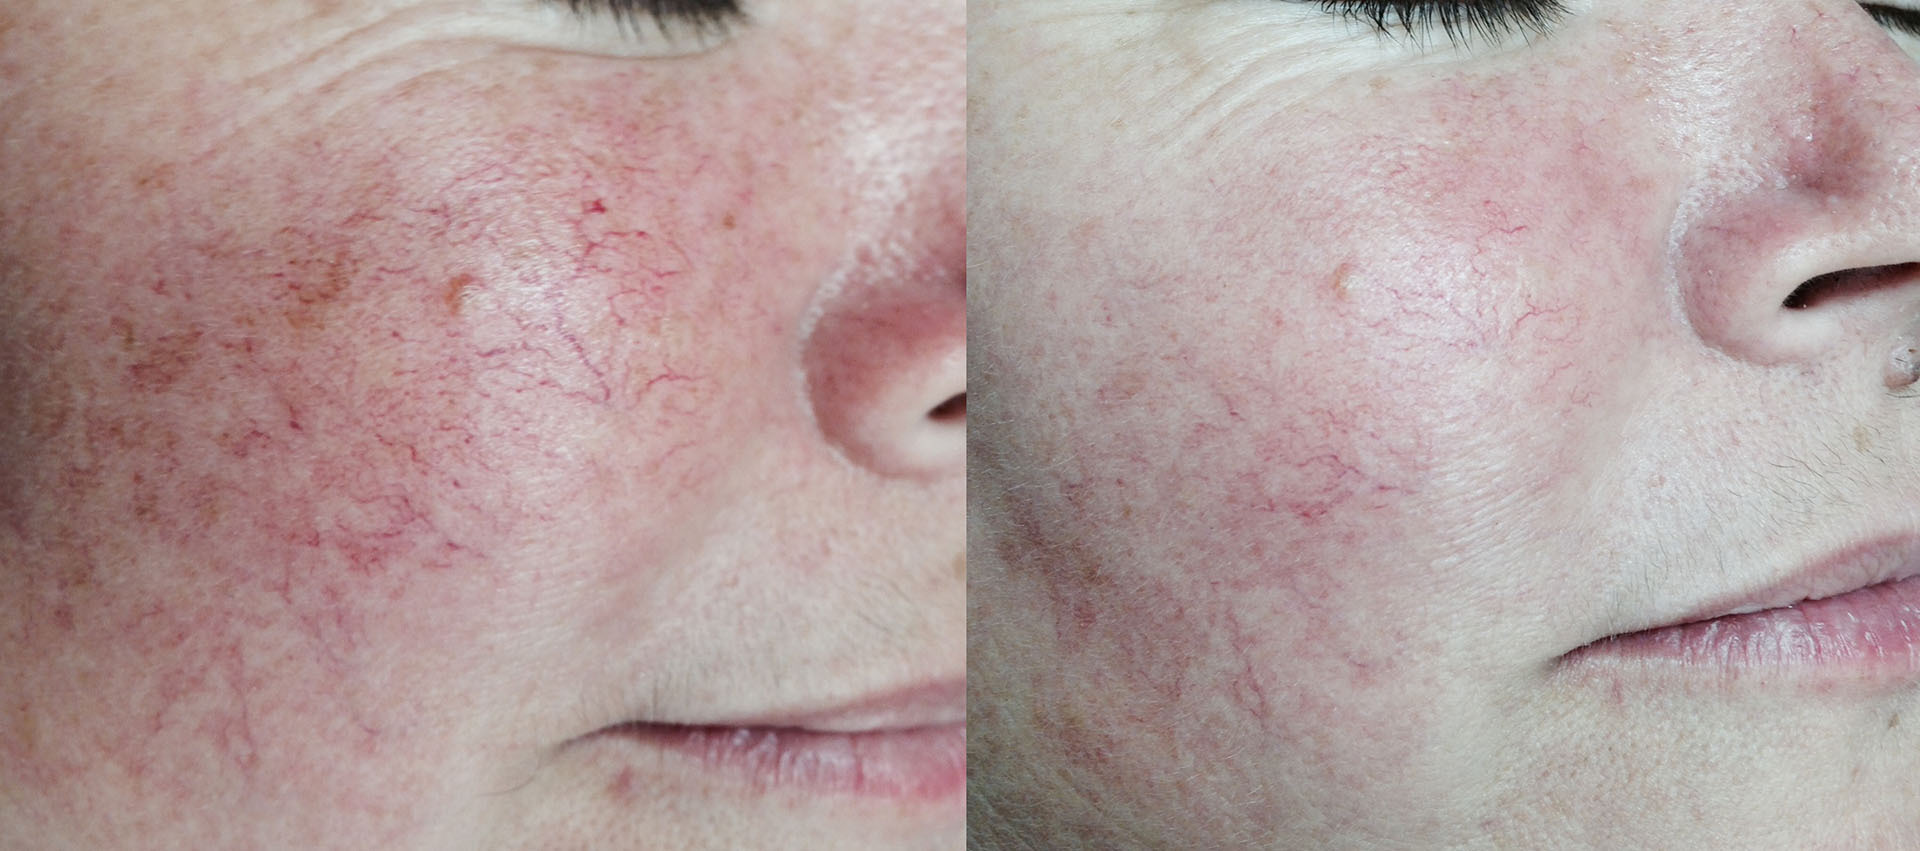 Before and after close-up on cheeks